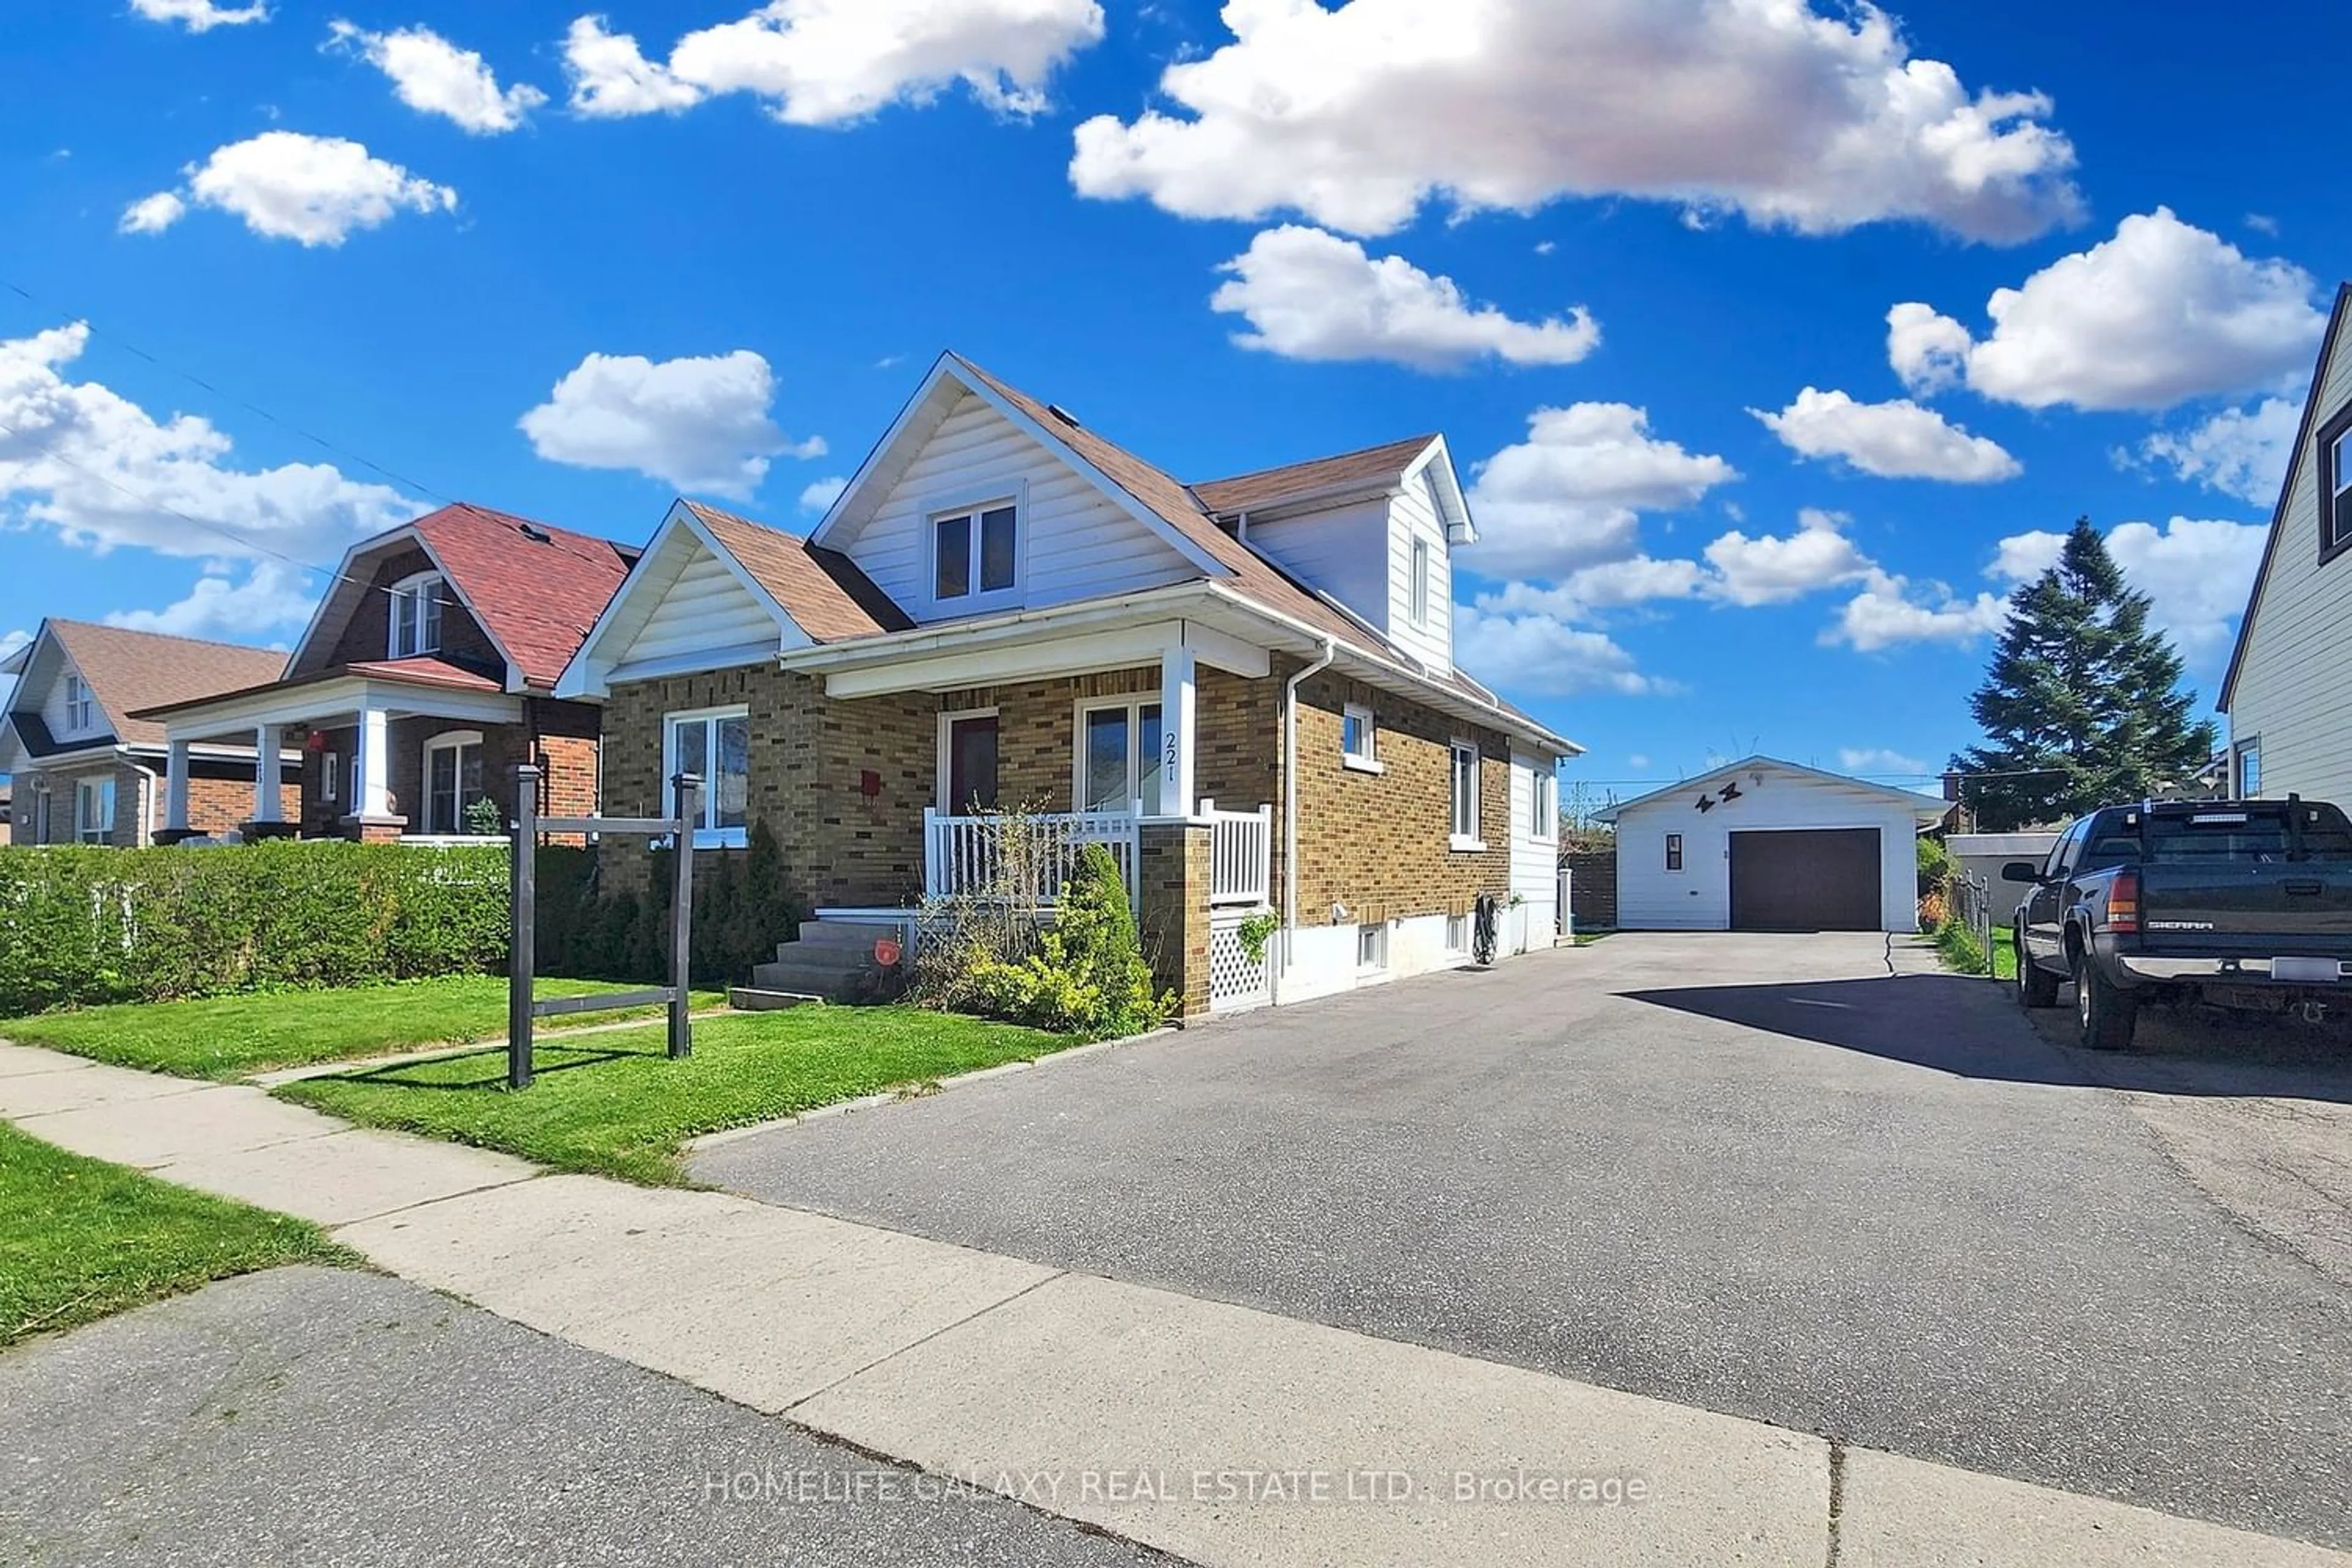 Frontside or backside of a home for 221 Mitchell Ave, Oshawa Ontario L1H 2V7